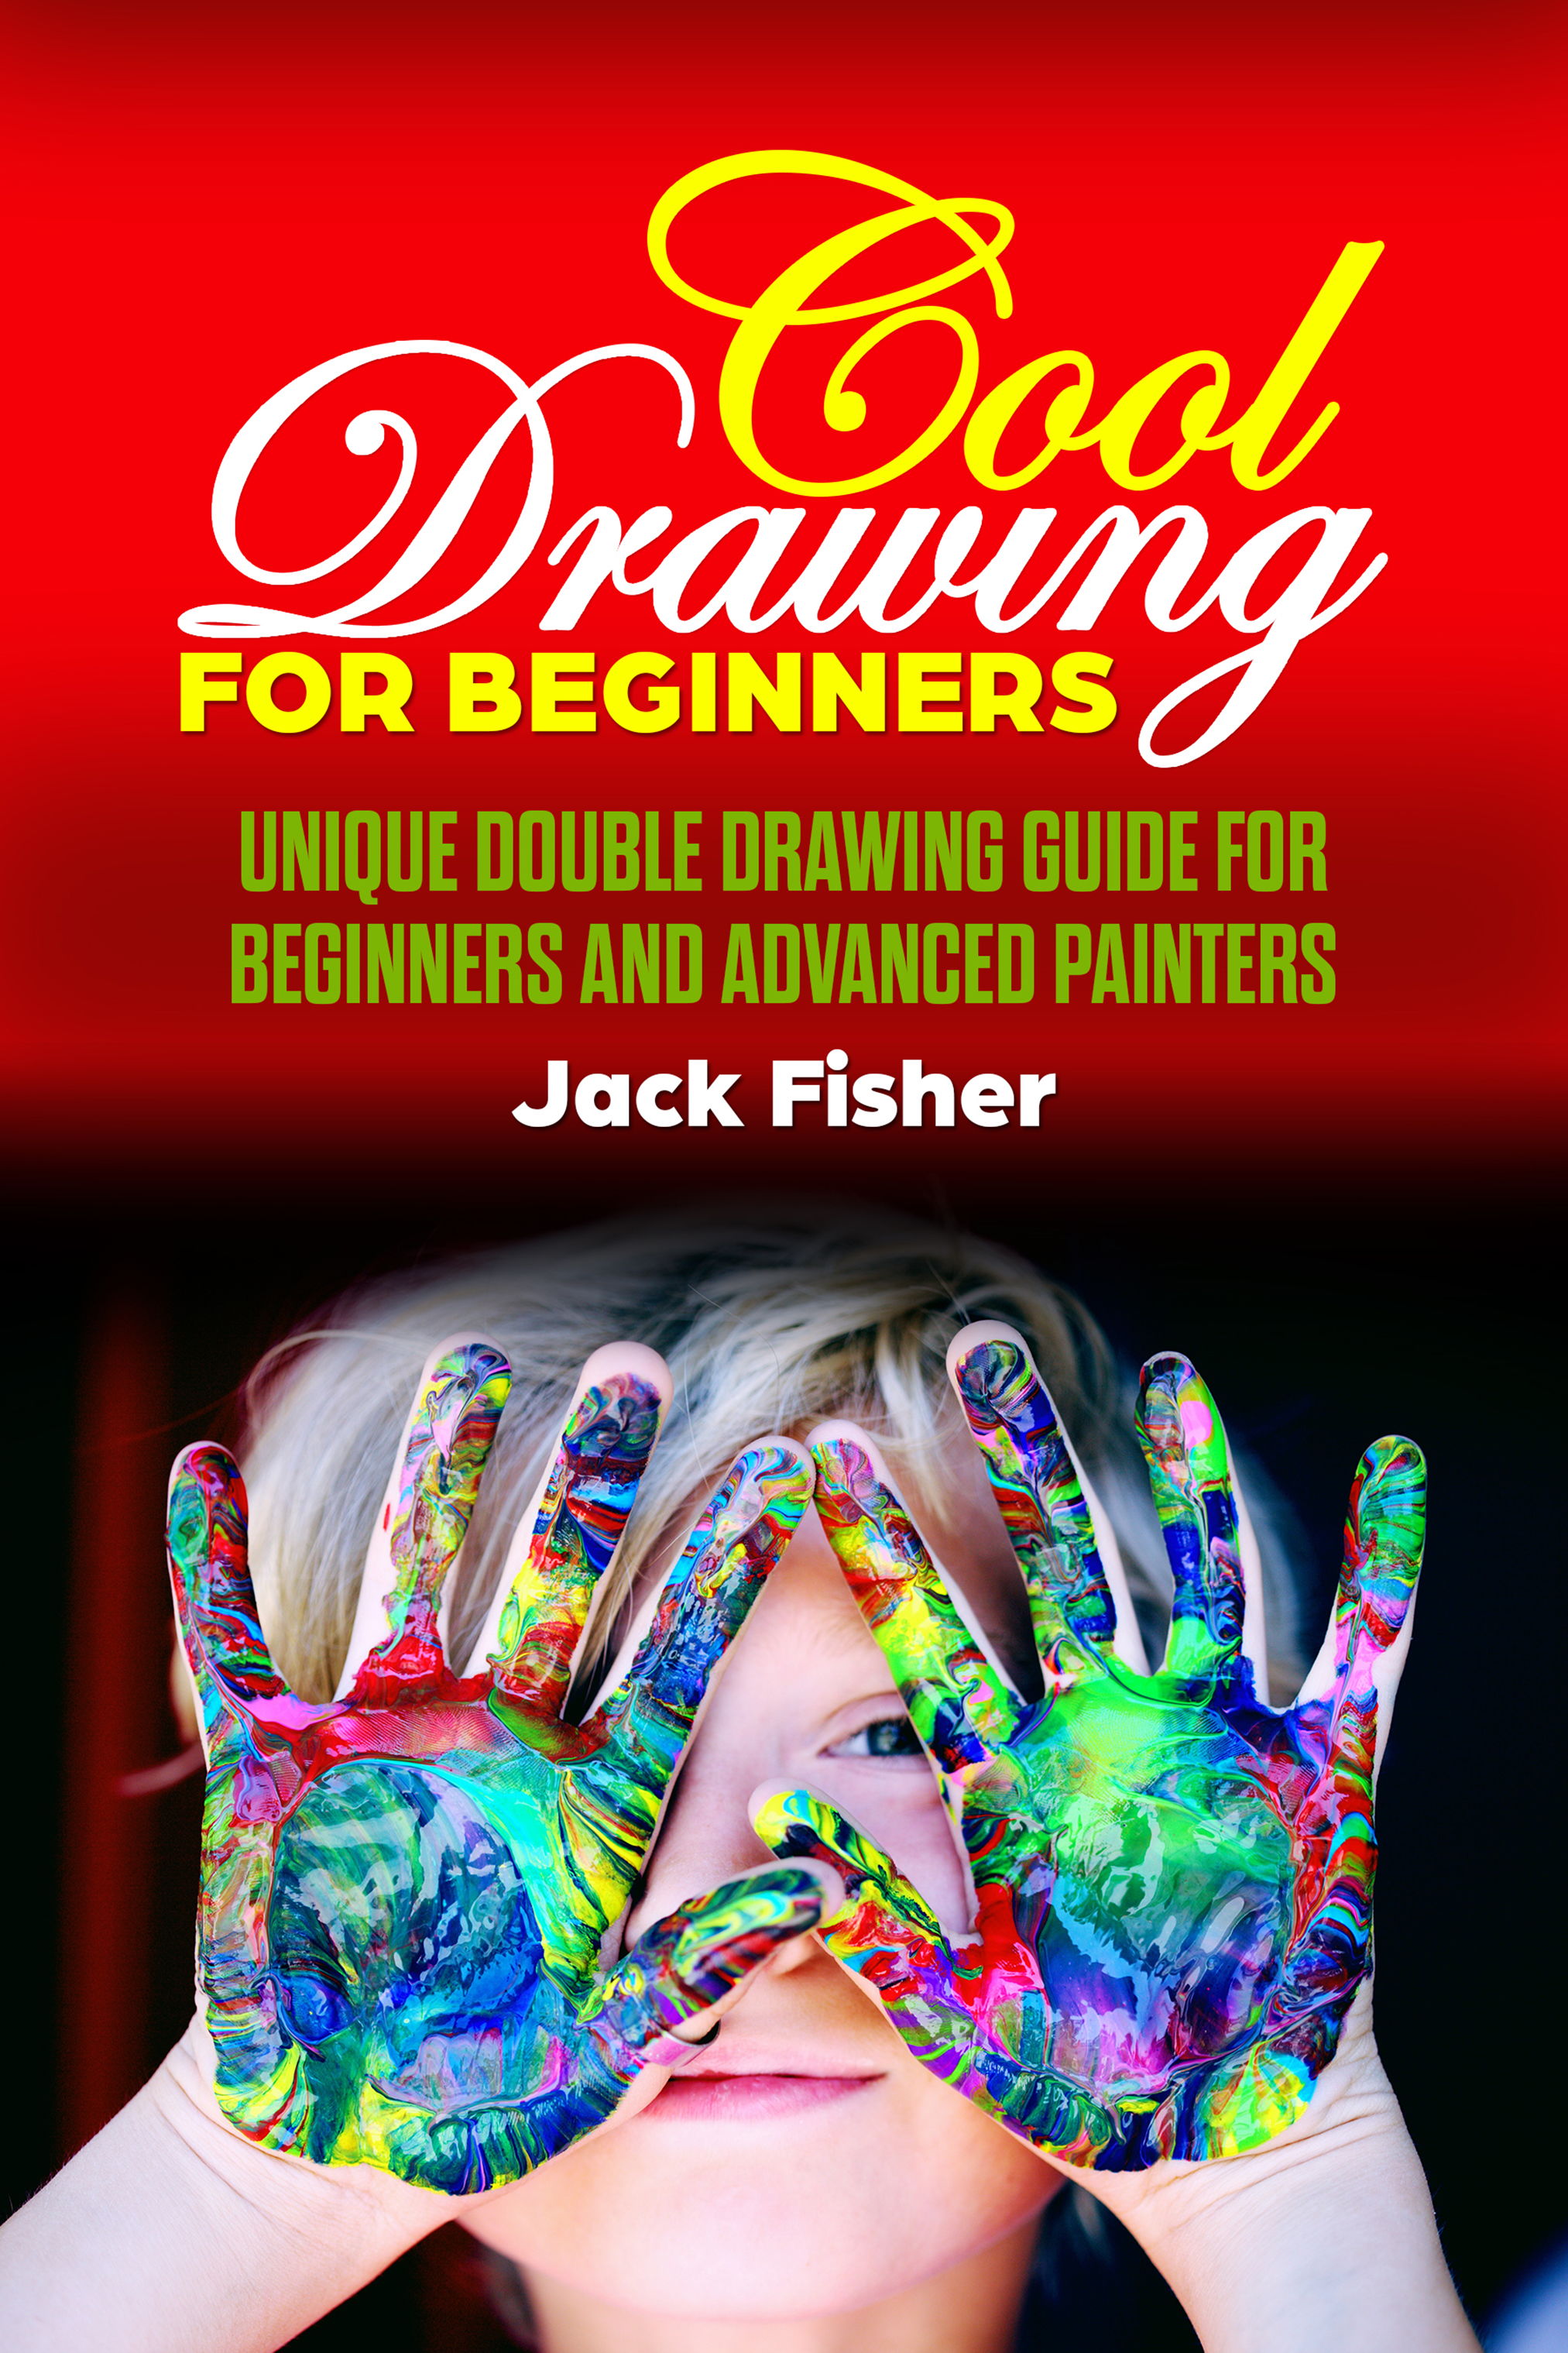 FREE: COOL DRAWING FOR BEGINNERS by JACK FISHER